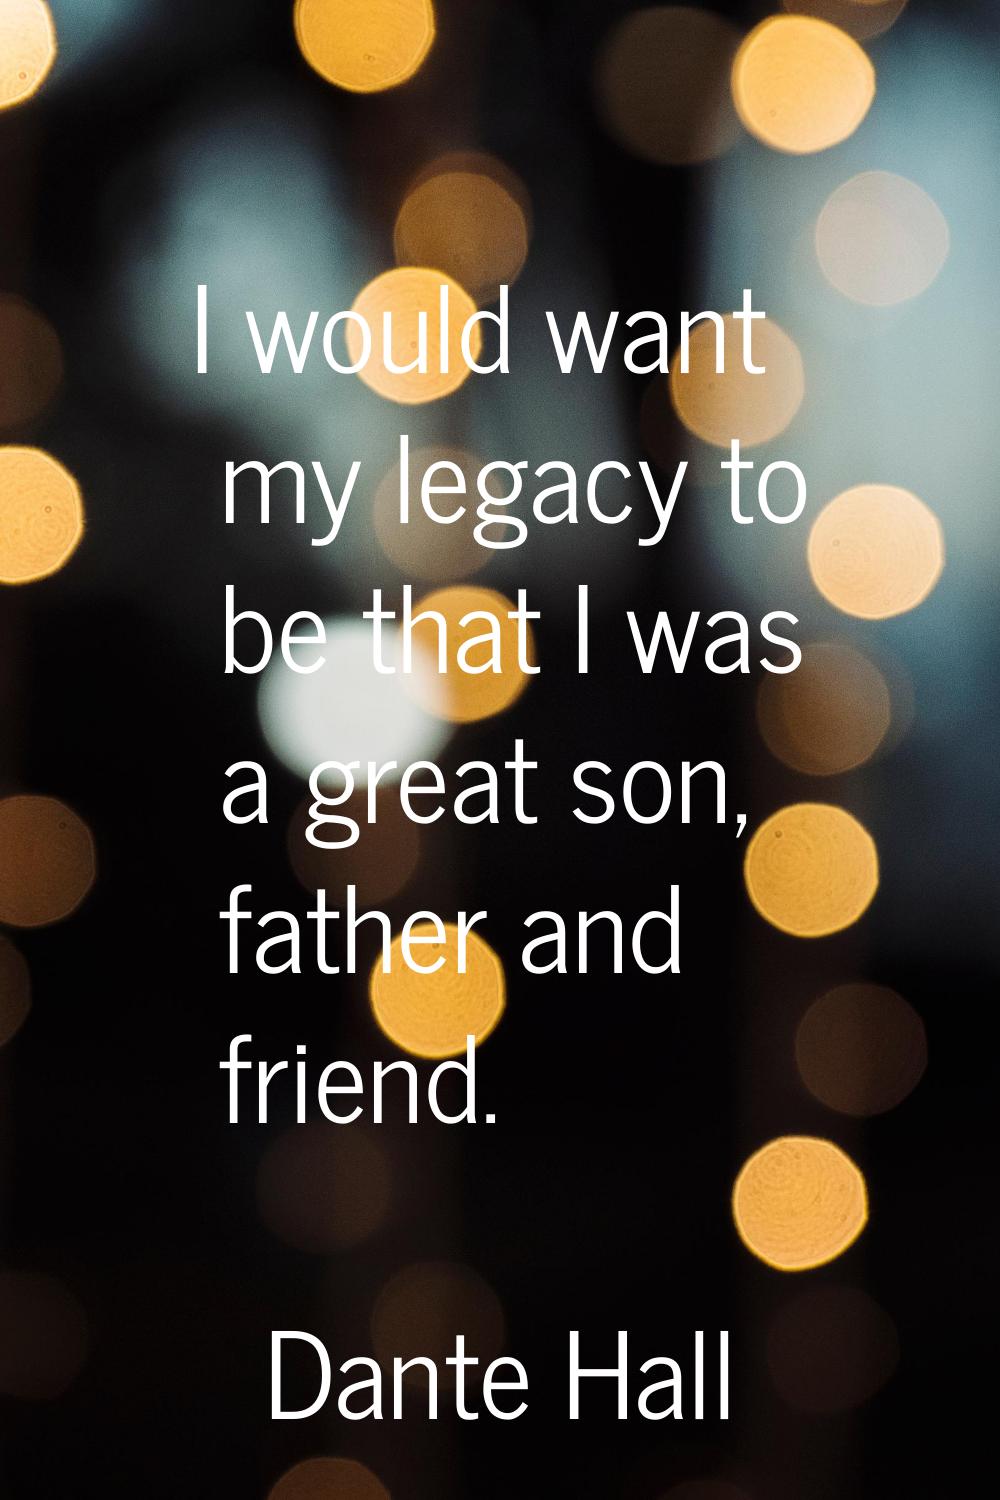 I would want my legacy to be that I was a great son, father and friend.